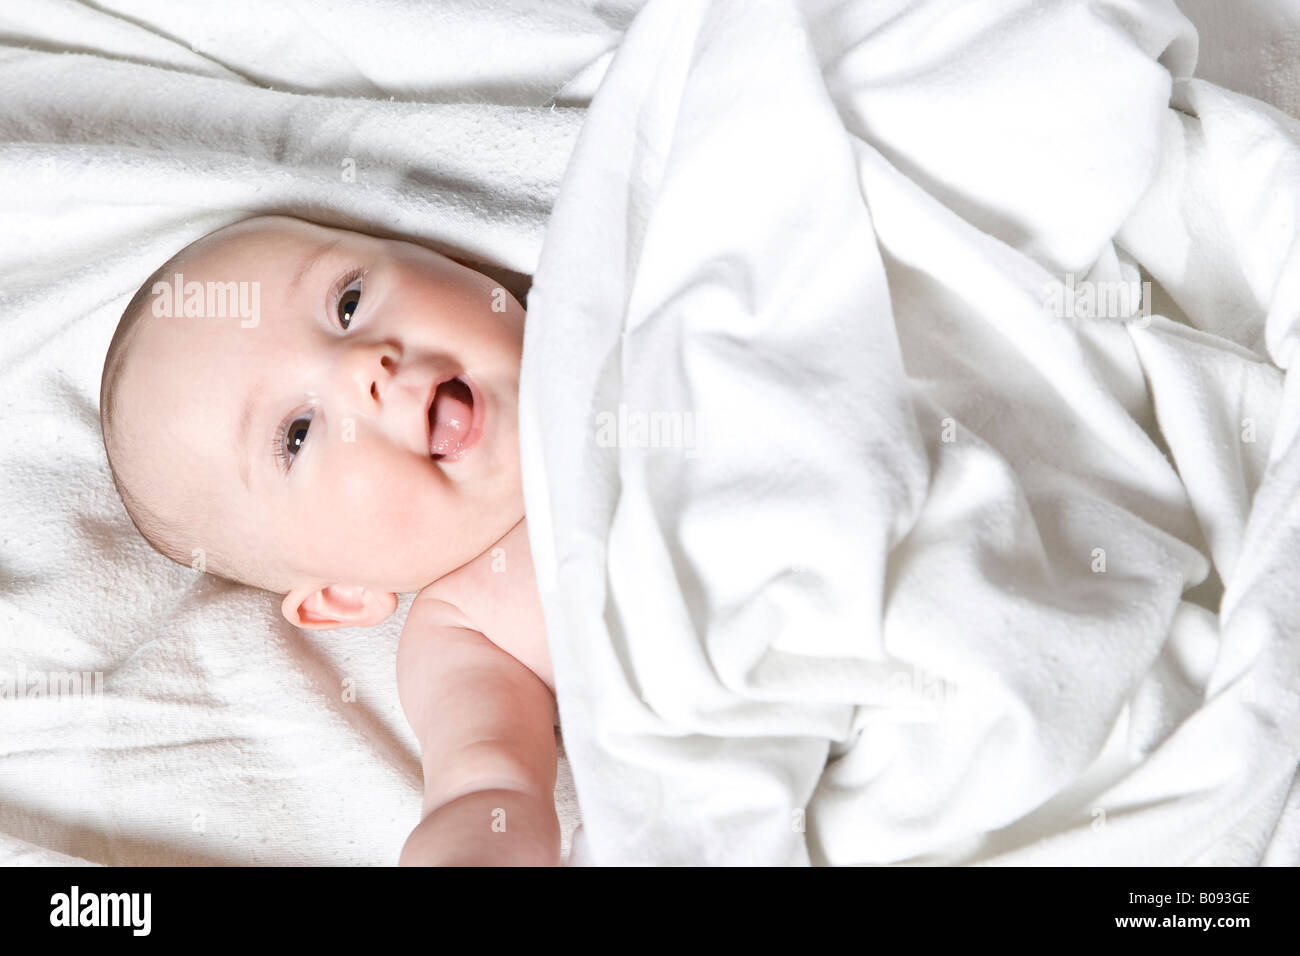 Four-month-old baby under a blanket Stock Photo